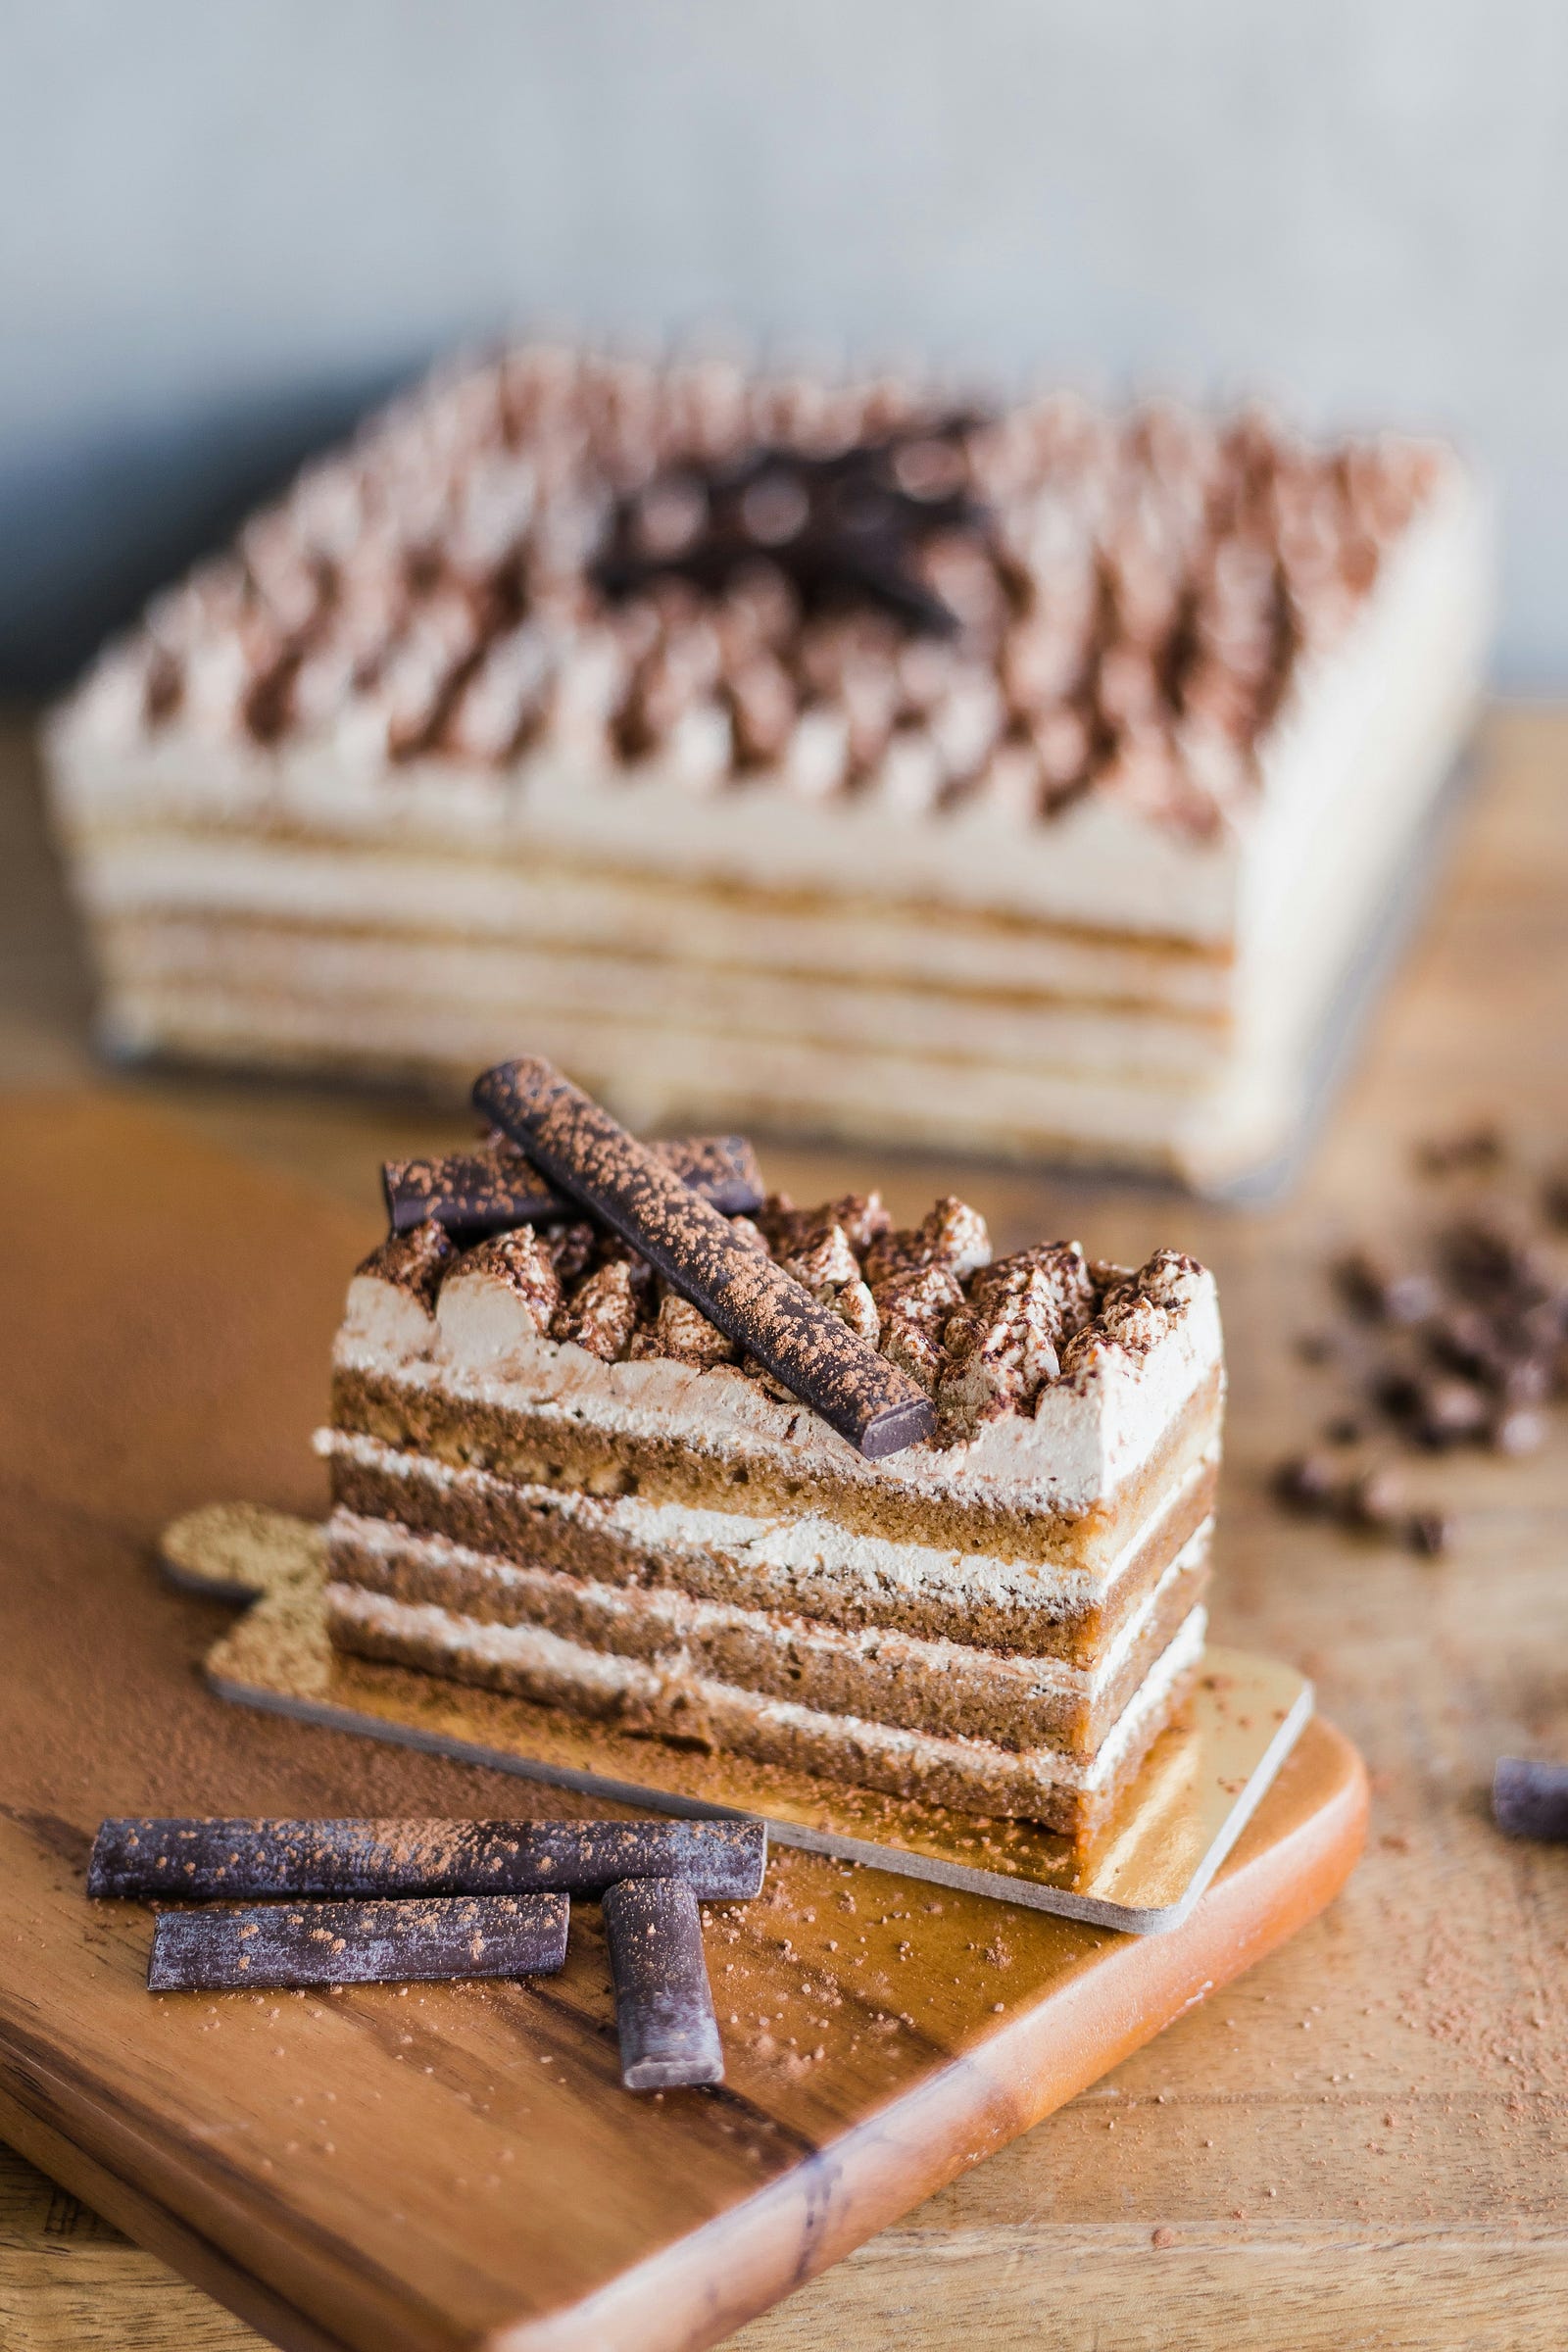 Multilayered carrot cake, with a cylinder of chocolate atop it. Make cakse are highly processed.